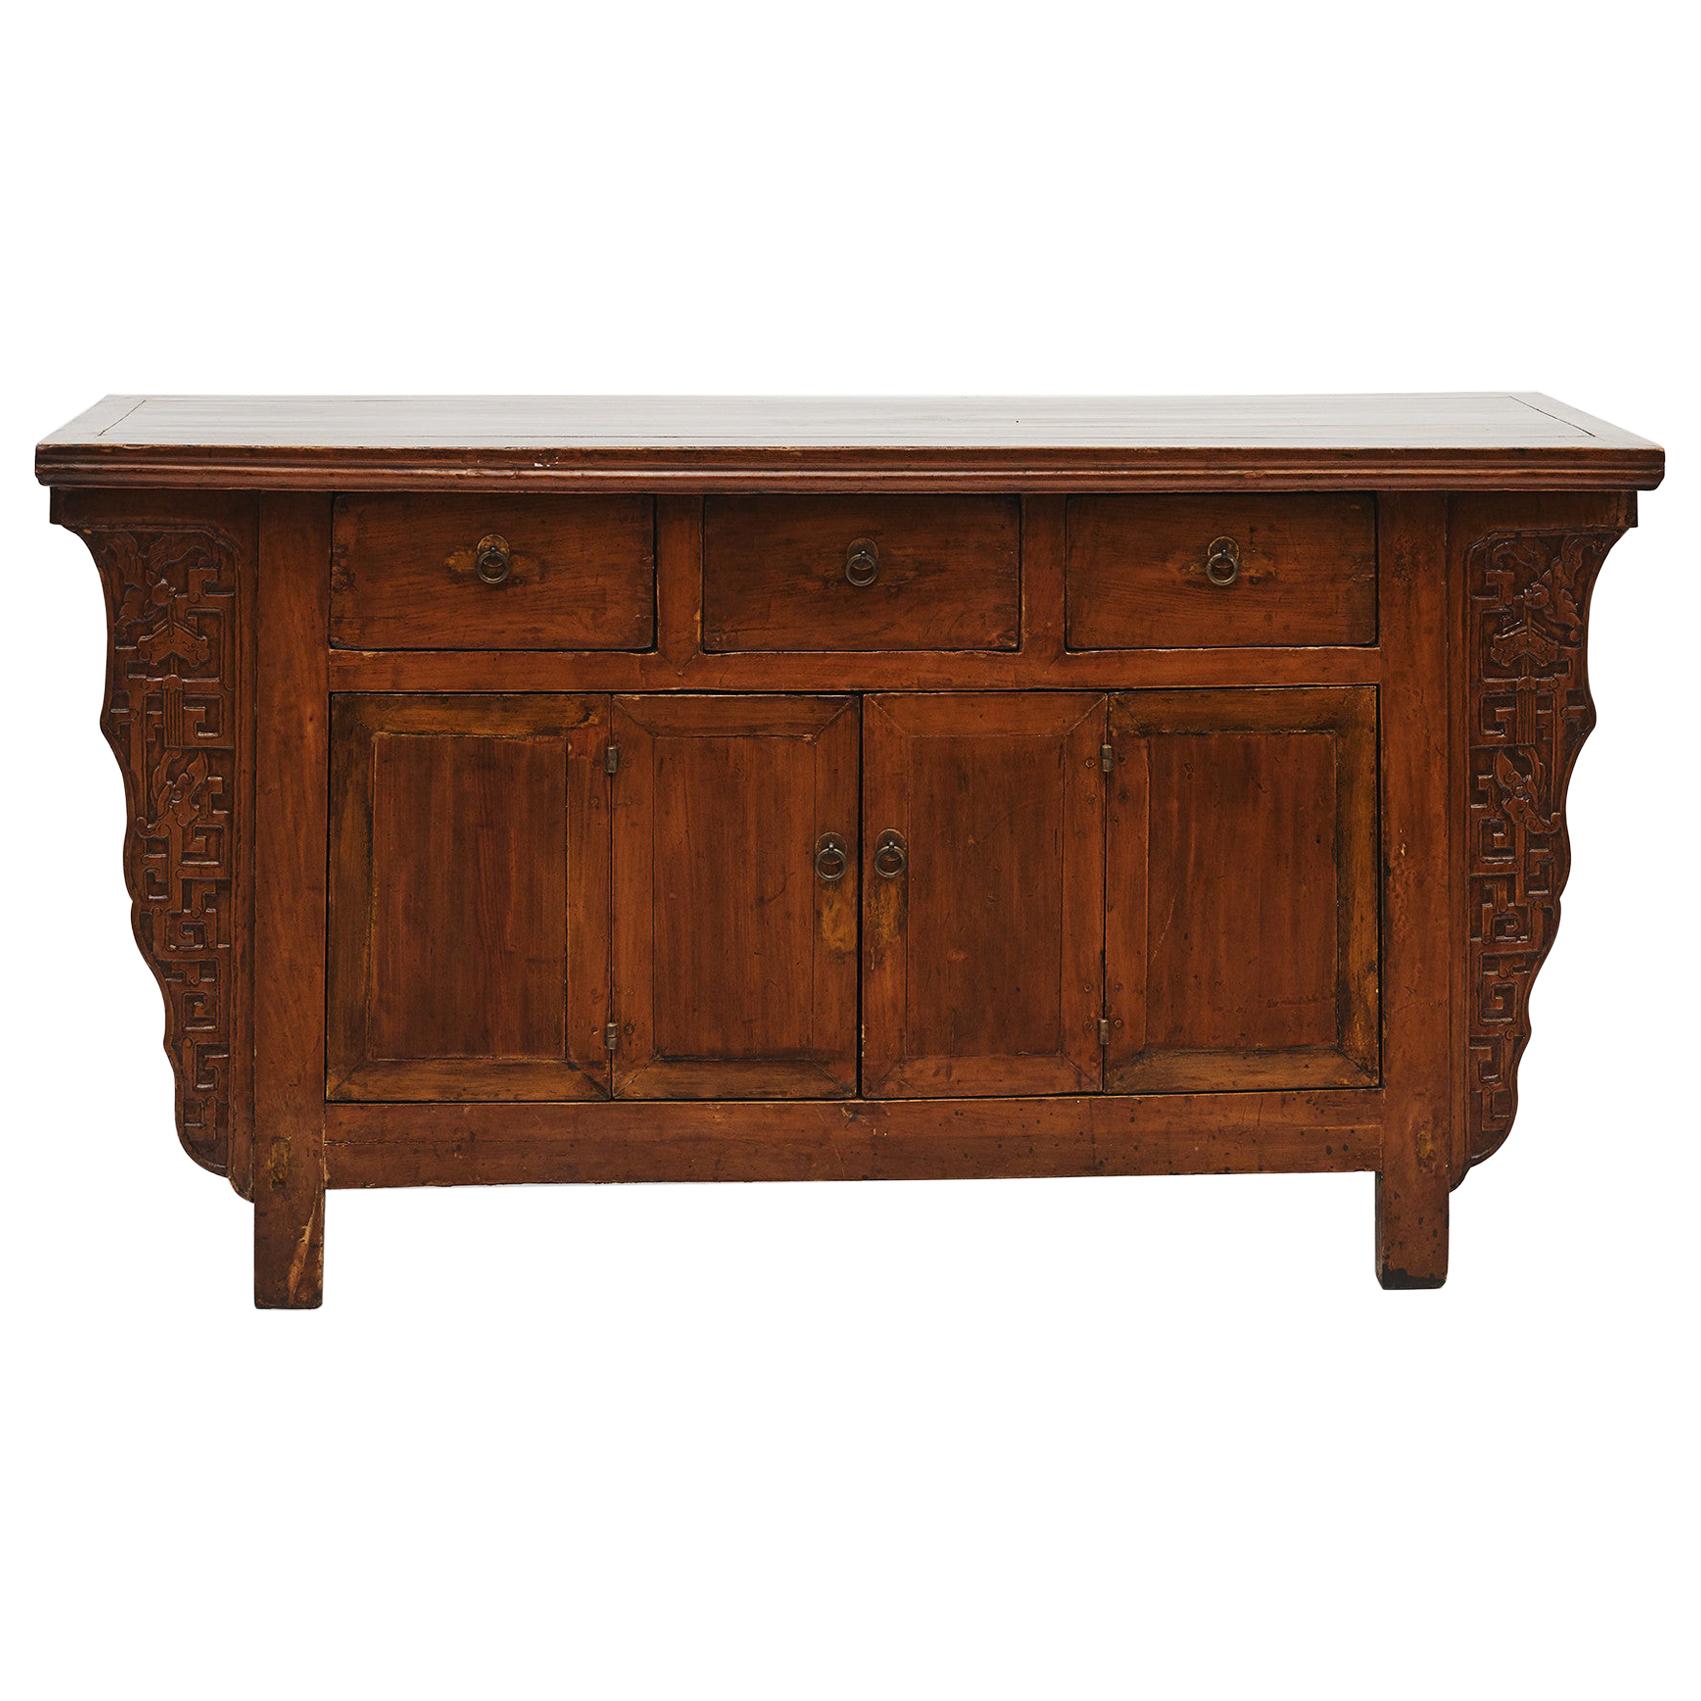 Chinese Ming Style Alter Cabinet or Sideboard